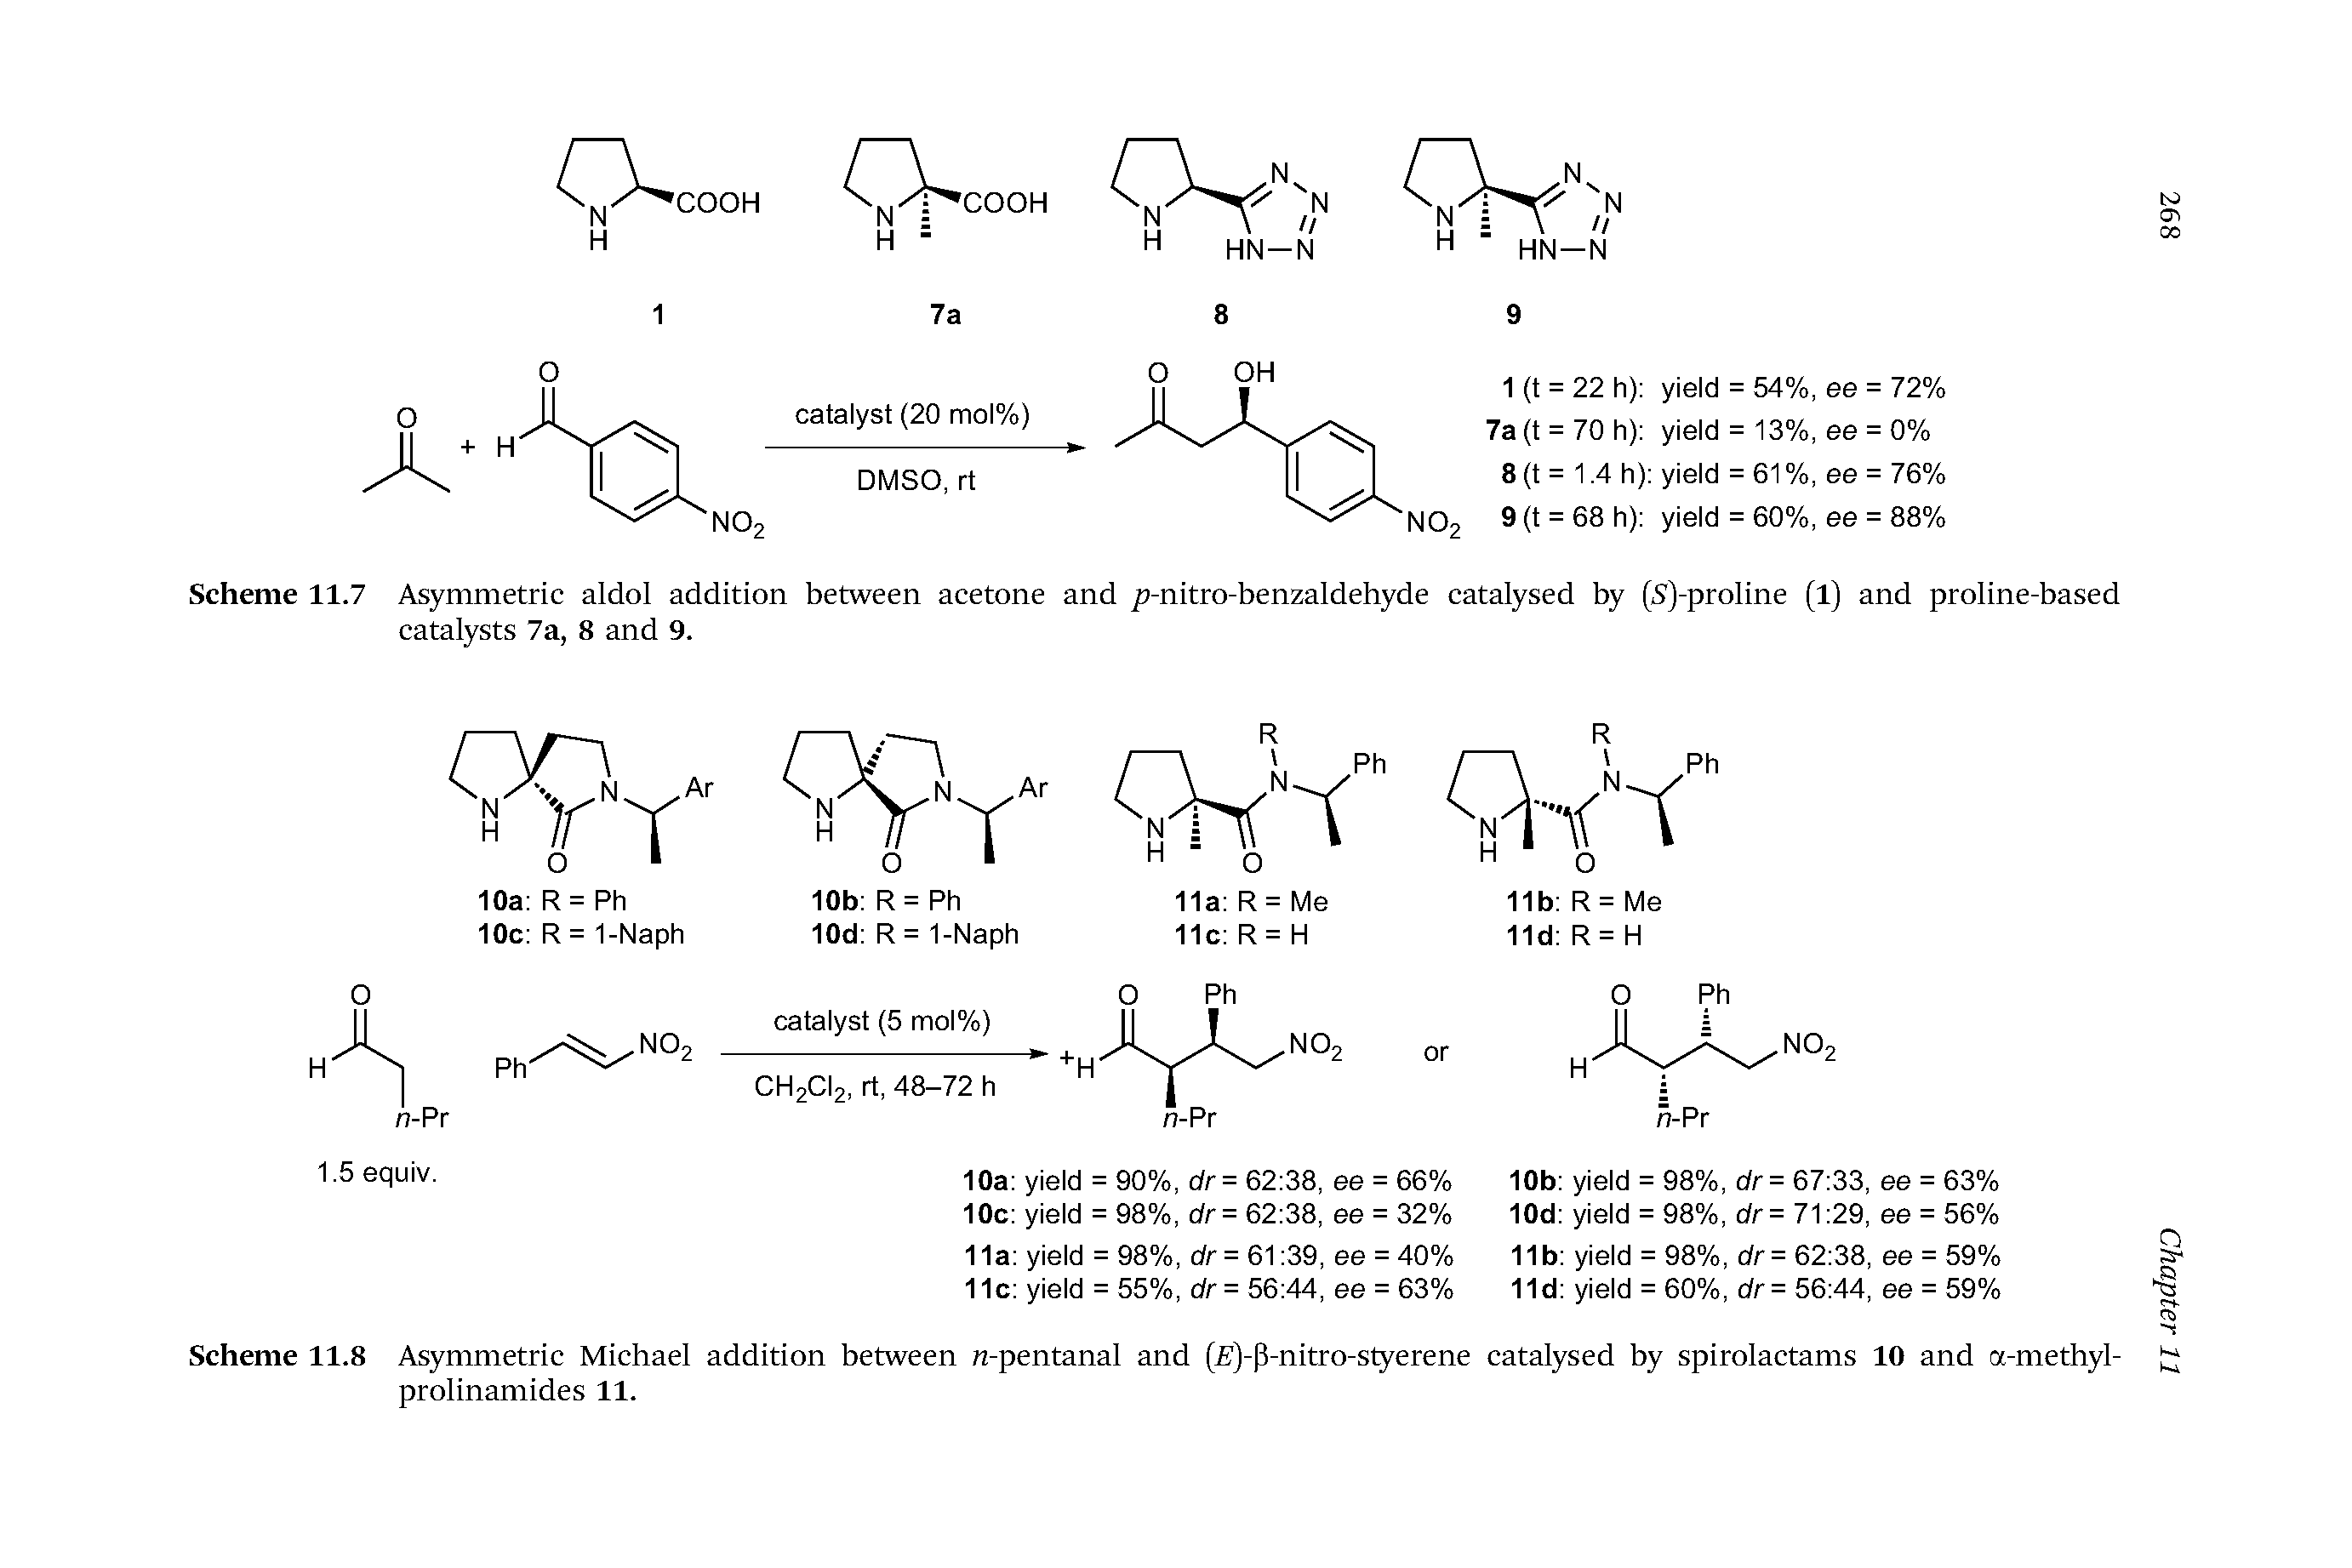 Scheme 11.8 Asymmetric Michael addition between w-pentanal and (i )-p-nitro-styerene catalysed by spirolactams 10 and a-methyl-prolinamides 11.